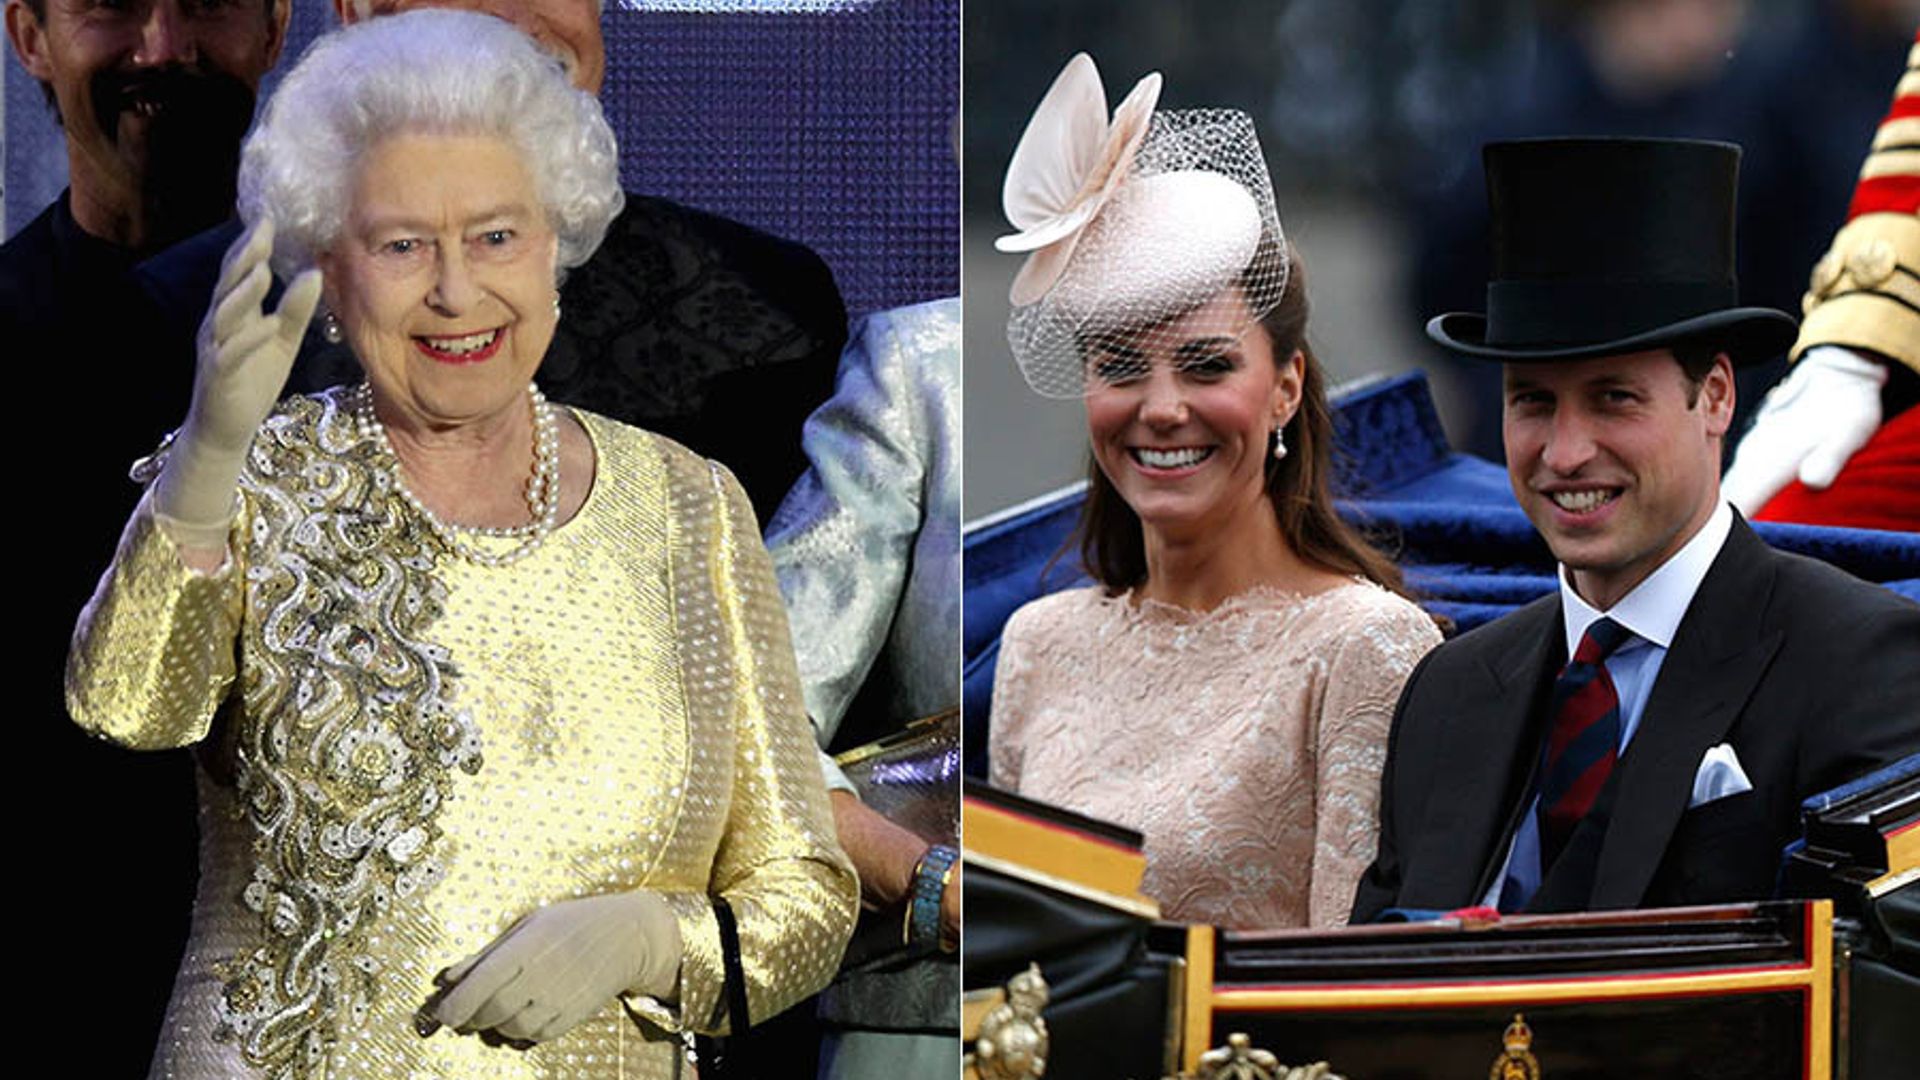 Looking back at the Queen's 2012 Diamond Jubilee